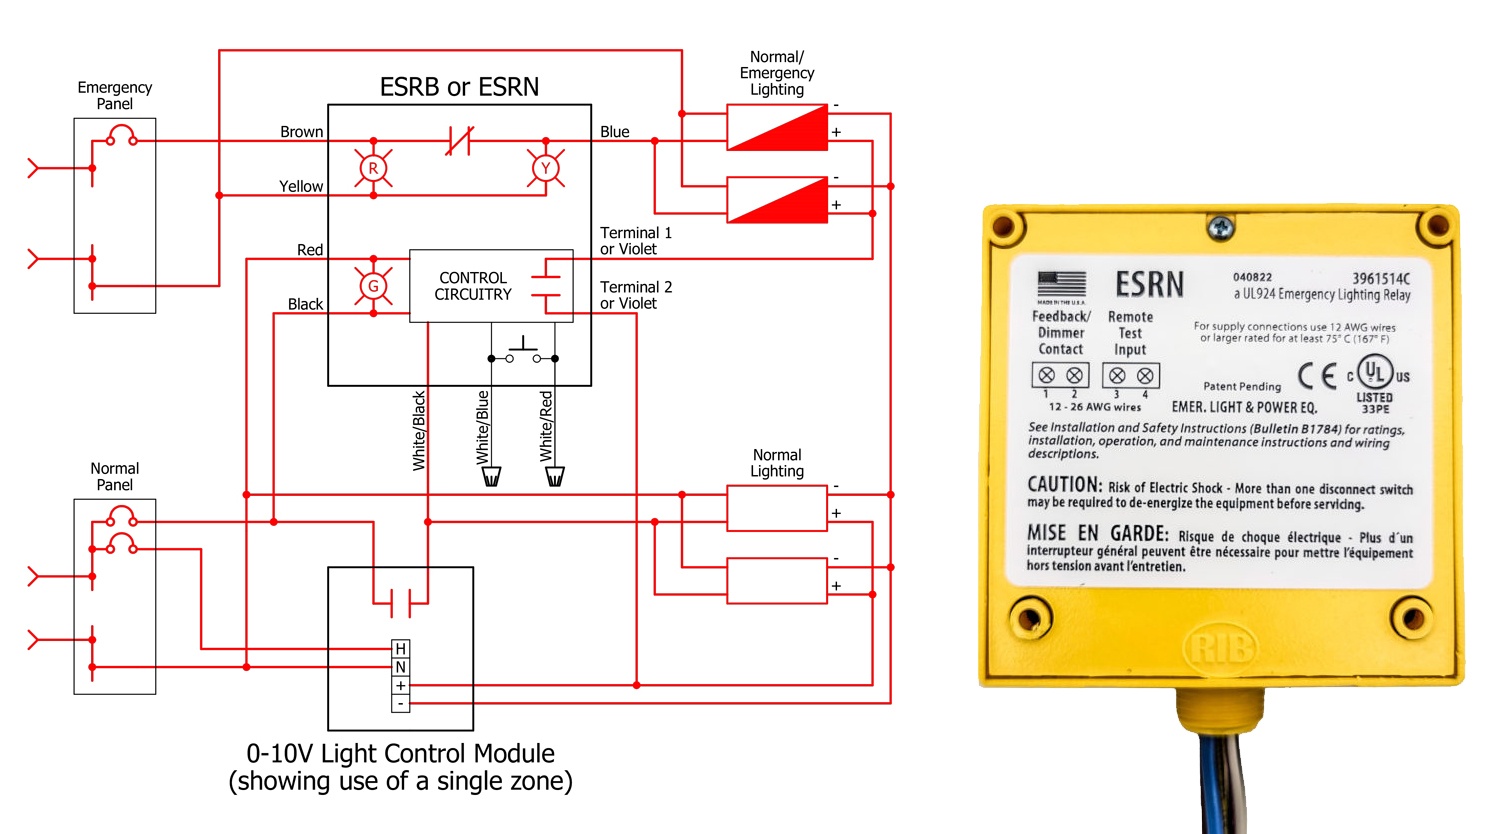 How to Integrate Emergency Lighting with Control Systems